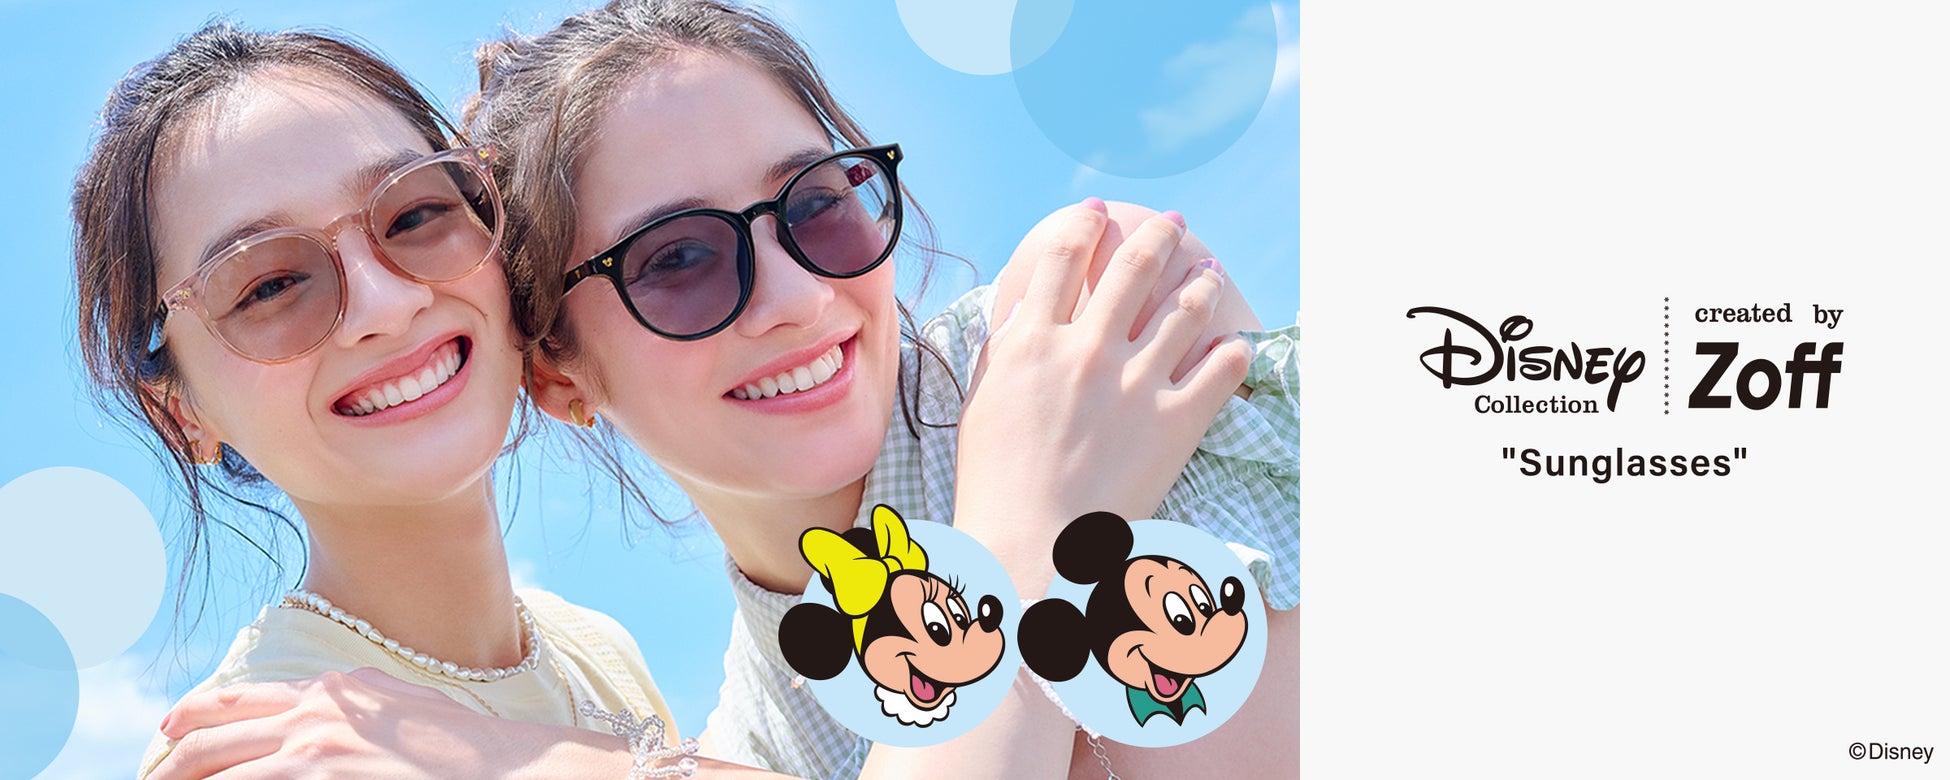 「Zoff」ディズニーコレクションから、『LET’S HANG OUT！ 』がテーマのサングラス「Disney Collection created by Zoff “Sunglasses”」が登場。